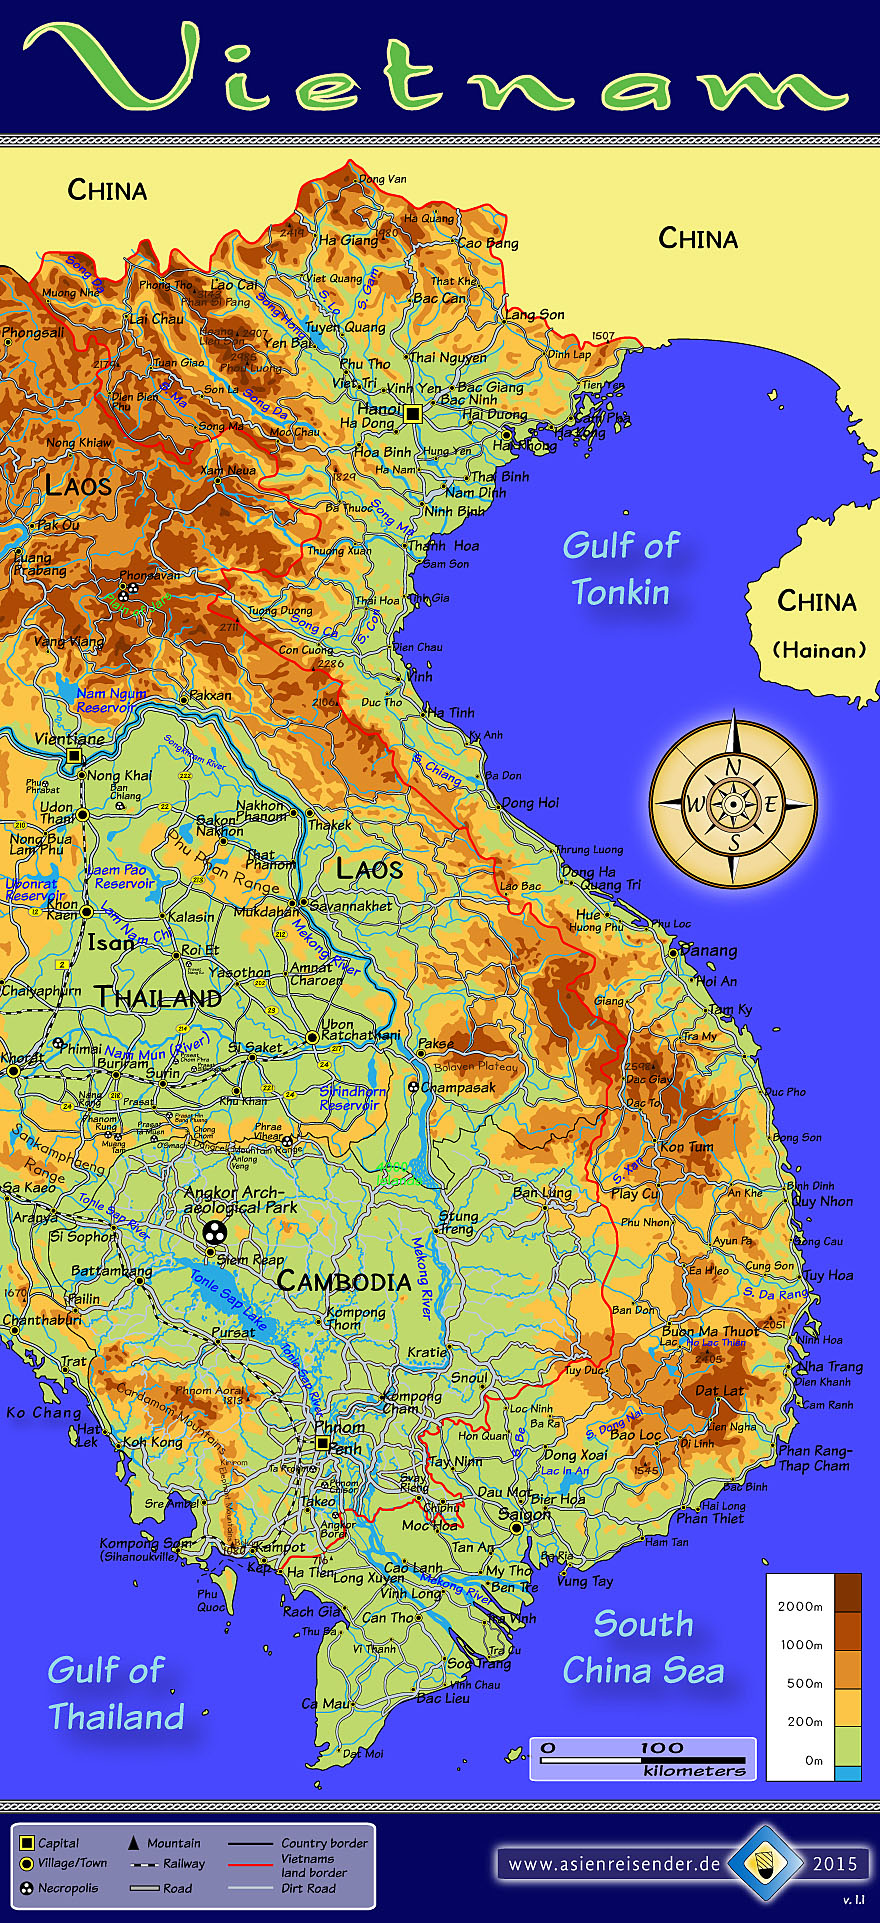 'Topographical Map of Vietnam' by Asienreisender